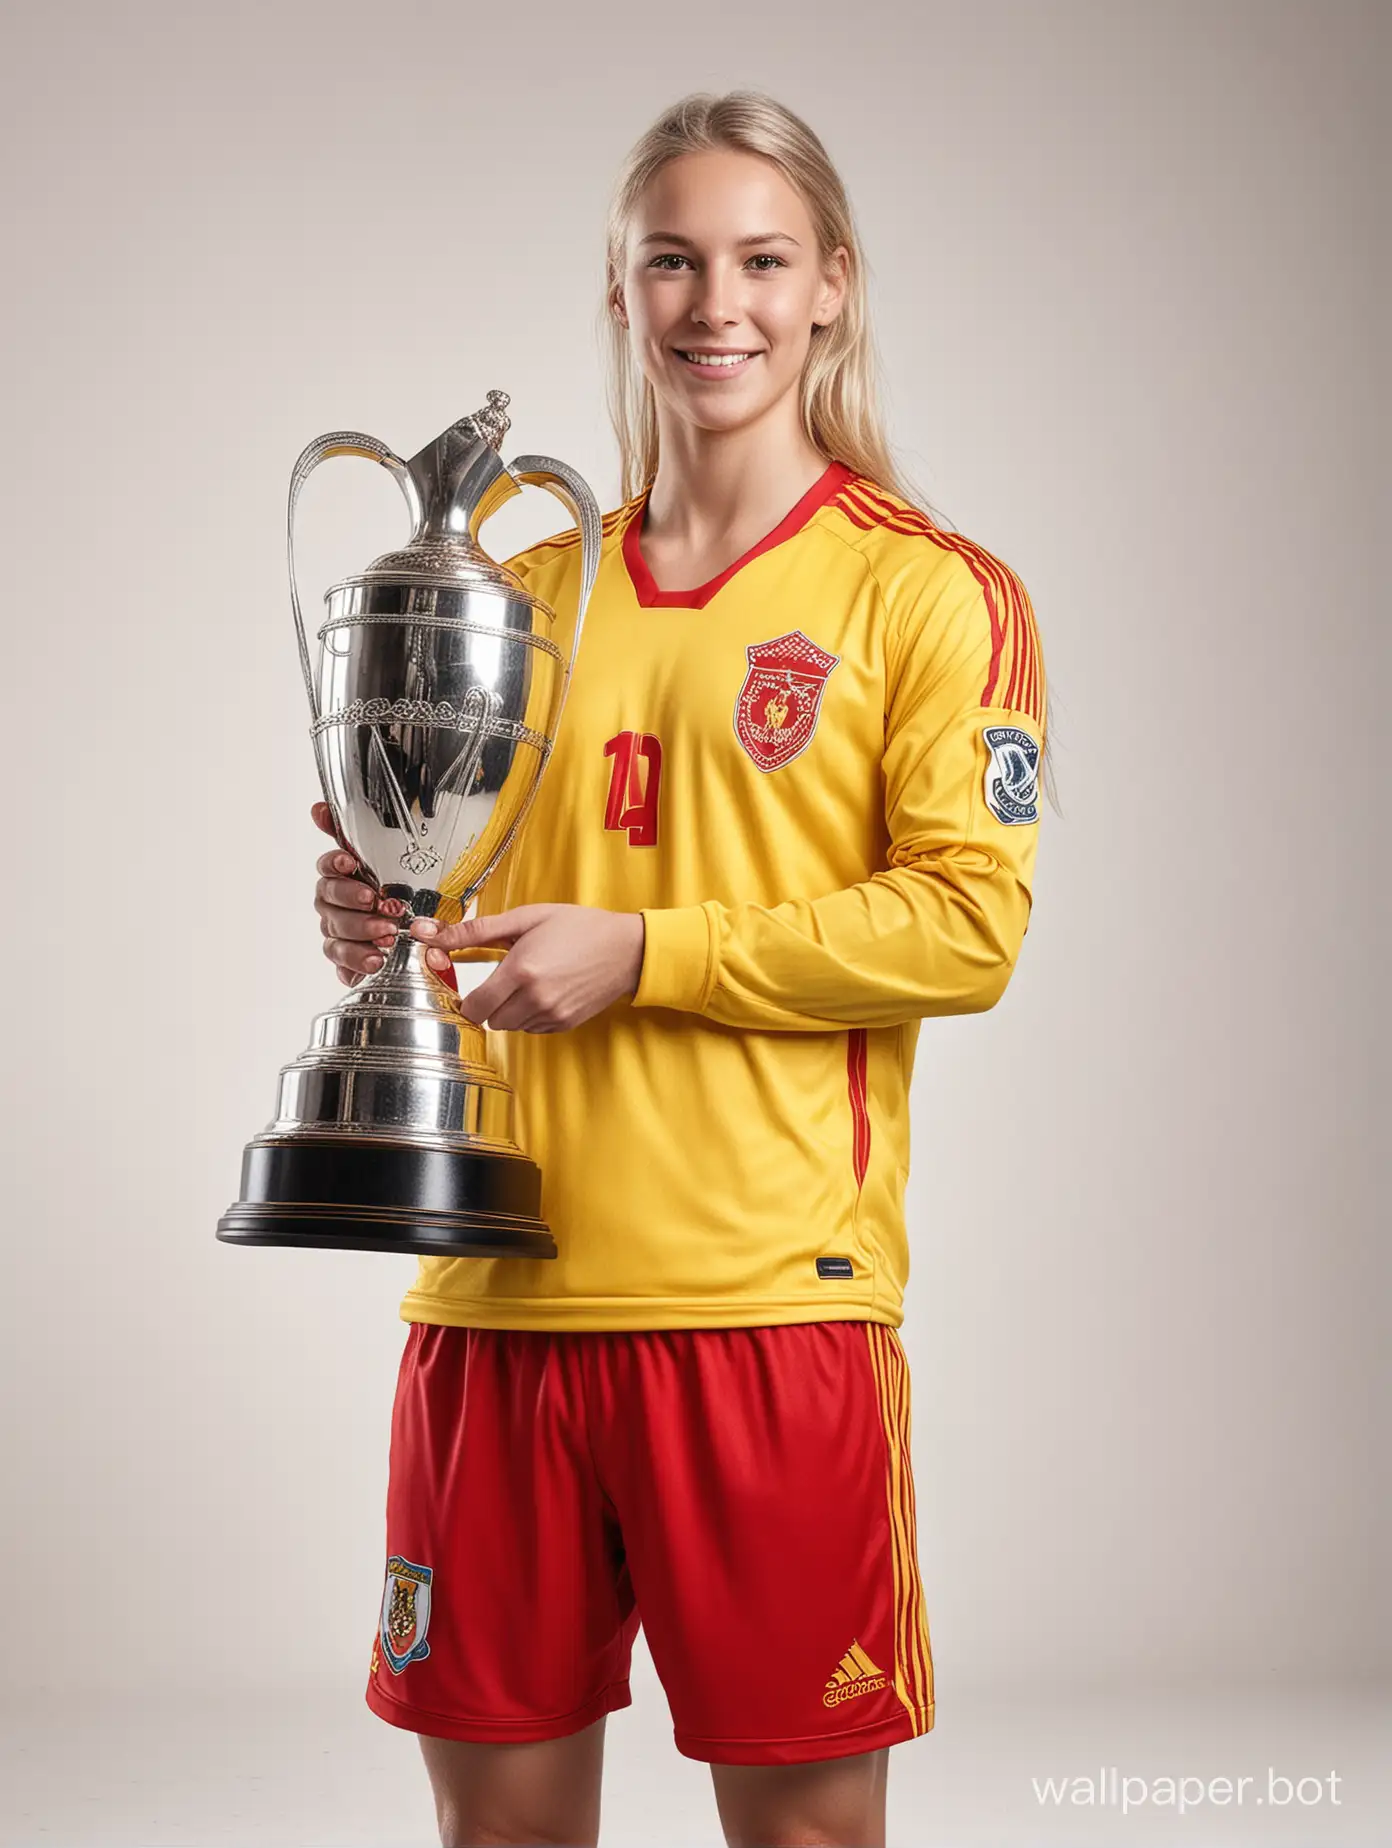 soccer player in bright red and yellow uniform holding a trophy blond Dane photo high resolution unique detail masterpiece white background studio photo